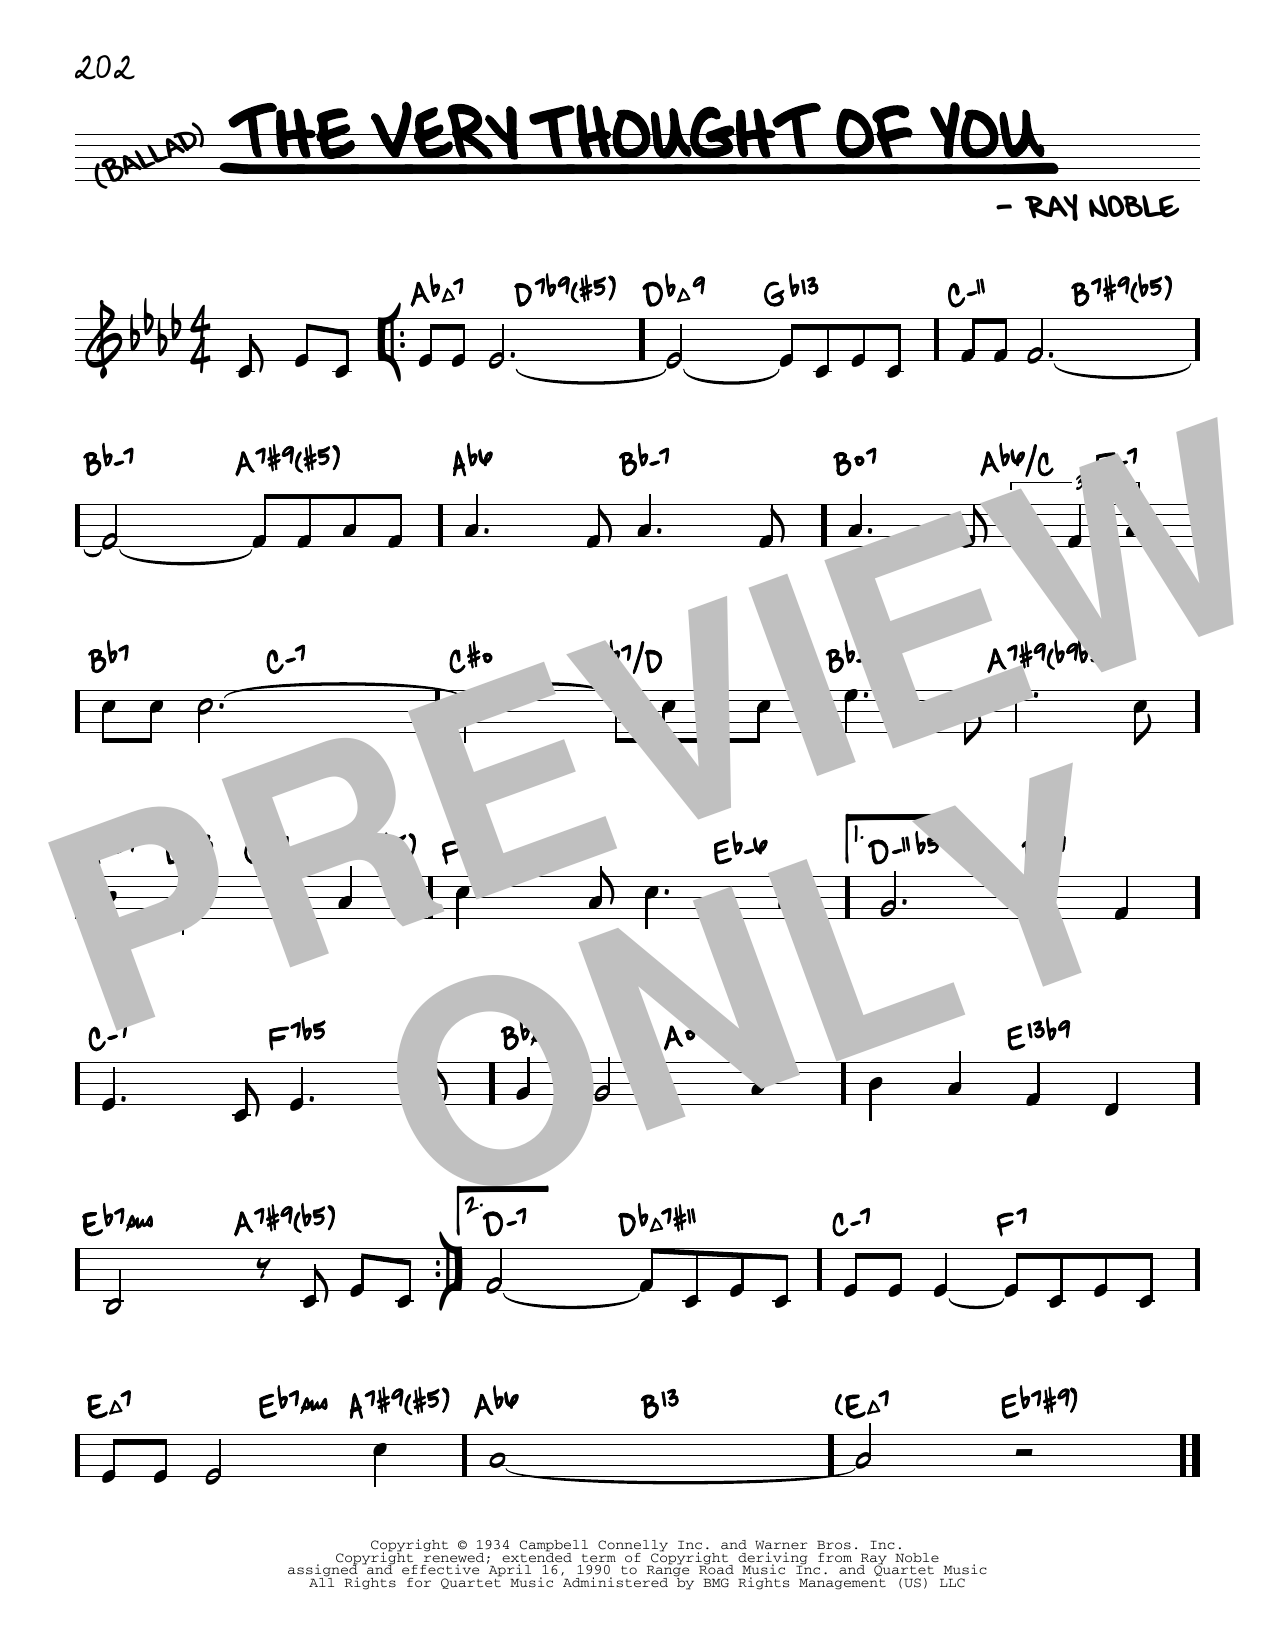 Download Ray Noble The Very Thought Of You (arr. David Haz Sheet Music